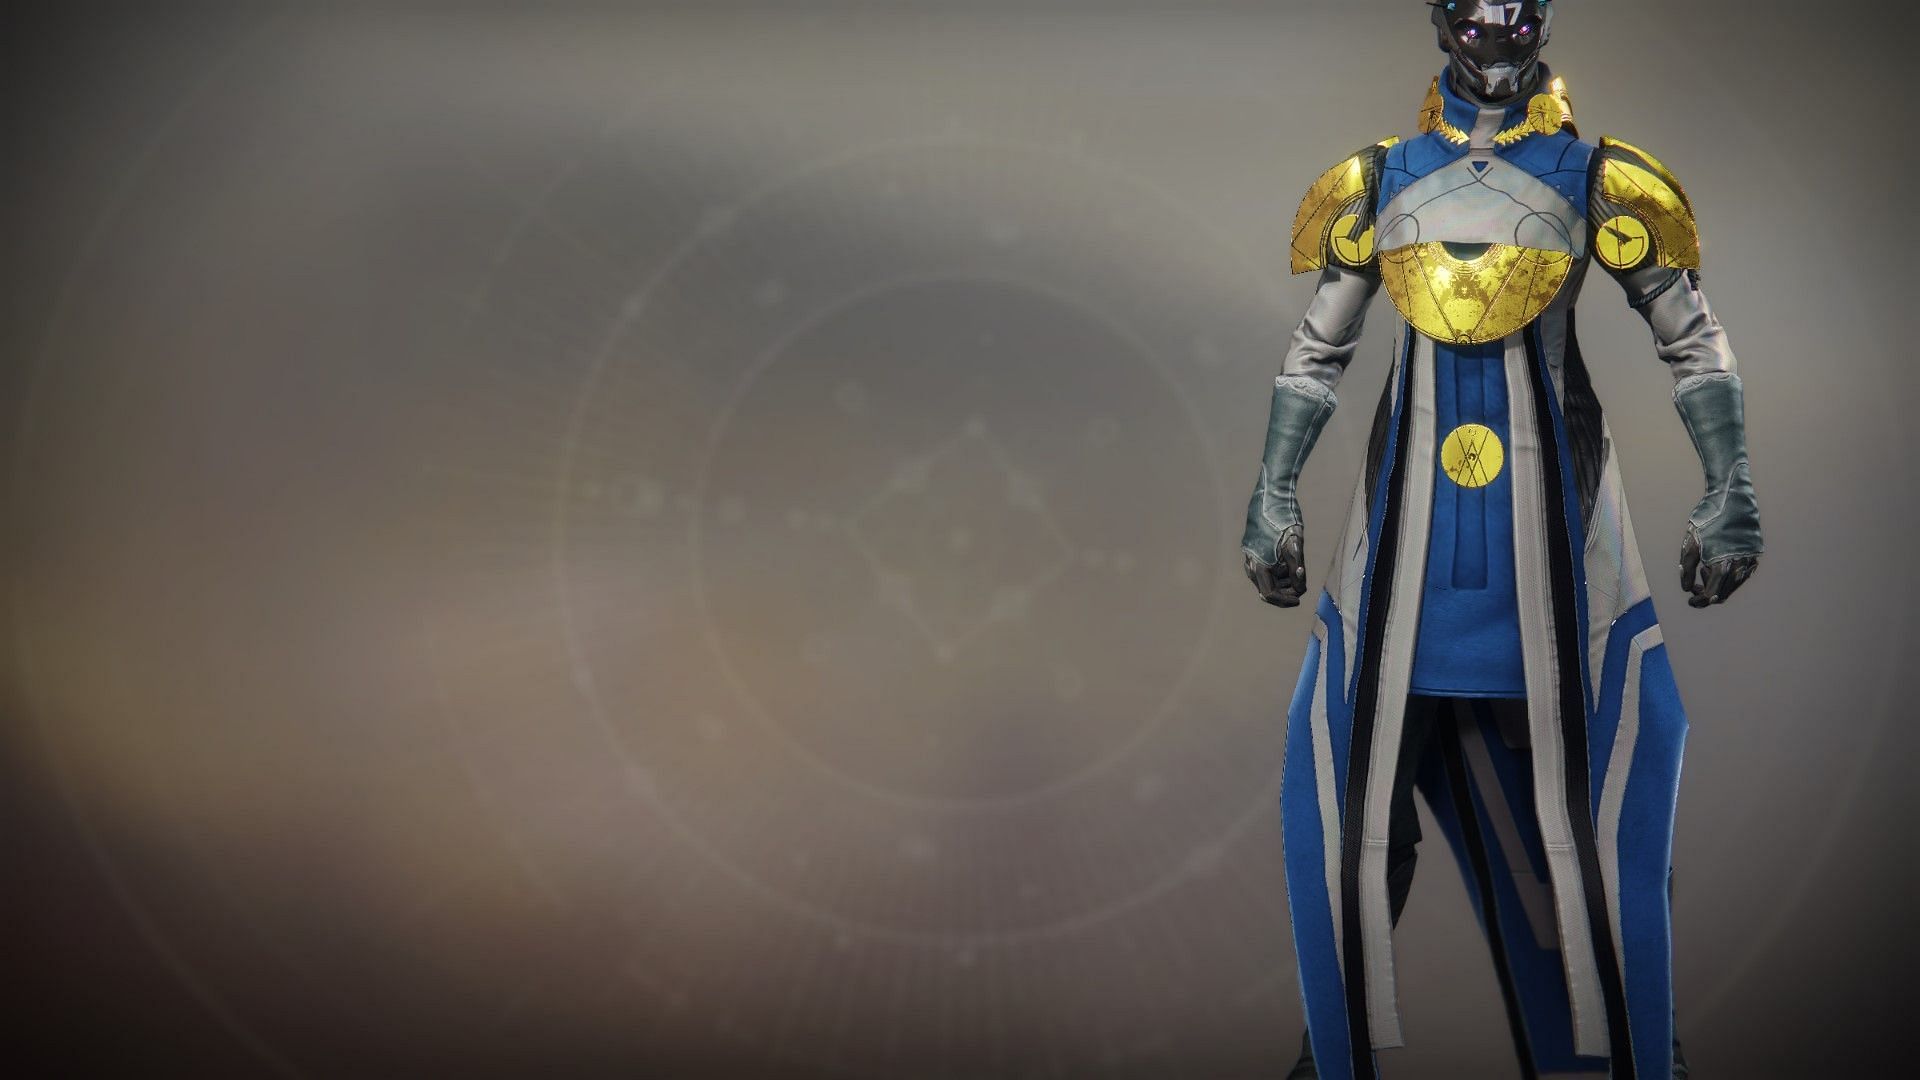 The Vesper of Radius is an underrated Exotic in Destiny 2 (Image via Bungie)